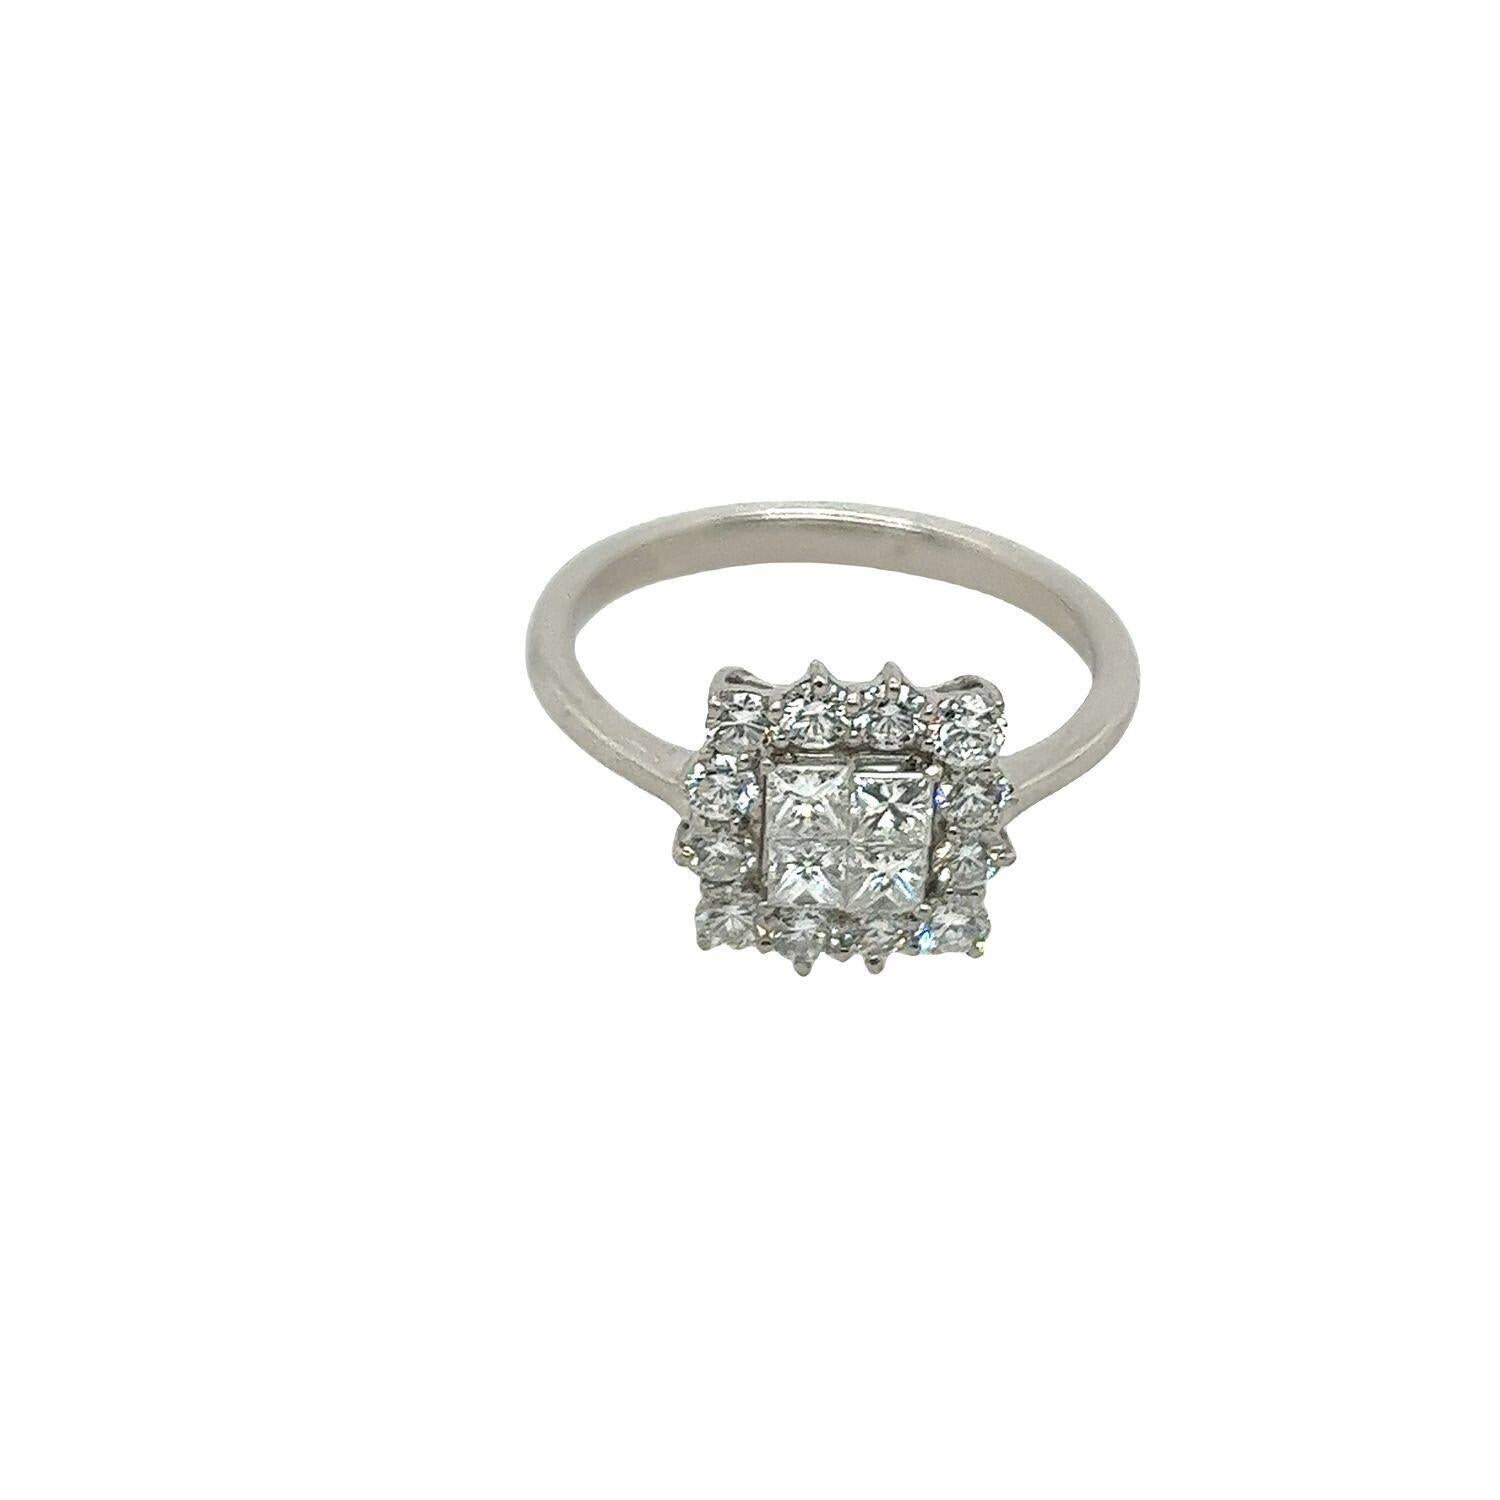 This cluster ring has a dazzling effect and is an excellent option for an engagement ring, set in Platinum, with 4 princesses cut Diamonds and 12 round brilliant cut Diamonds with a total Diamond weight of 1.0ct

Additional Information:
Total